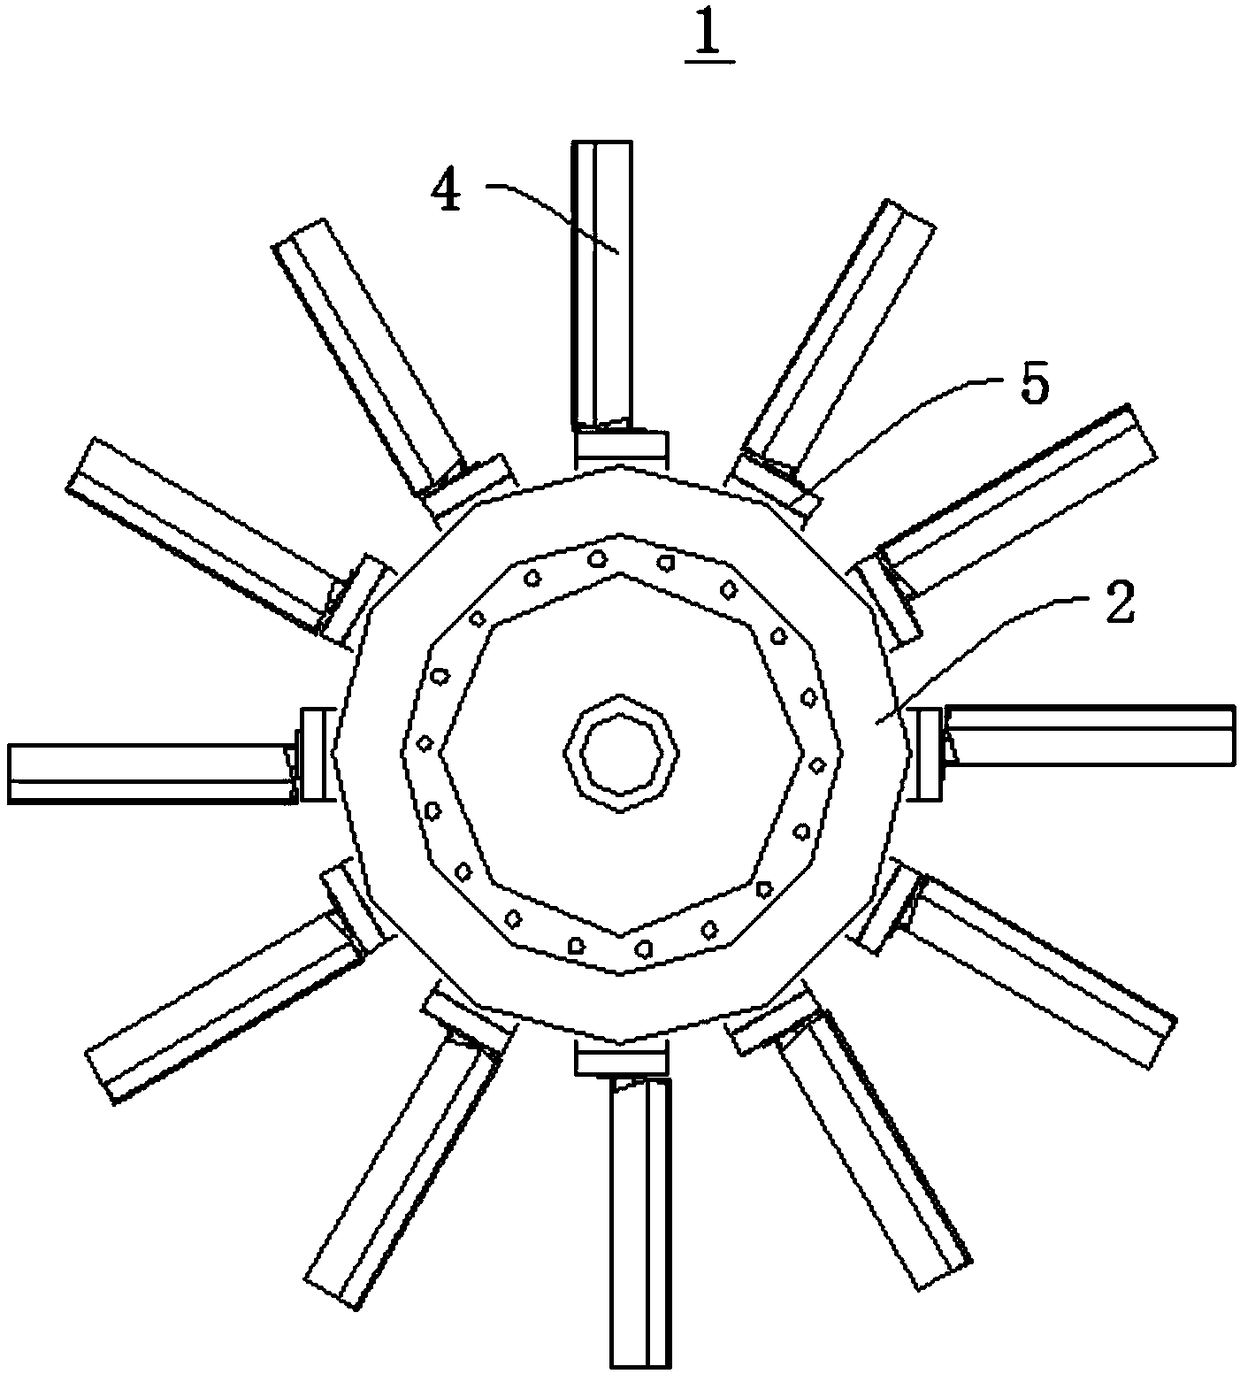 Adjustment mechanism for blades of axial flow fan and fan